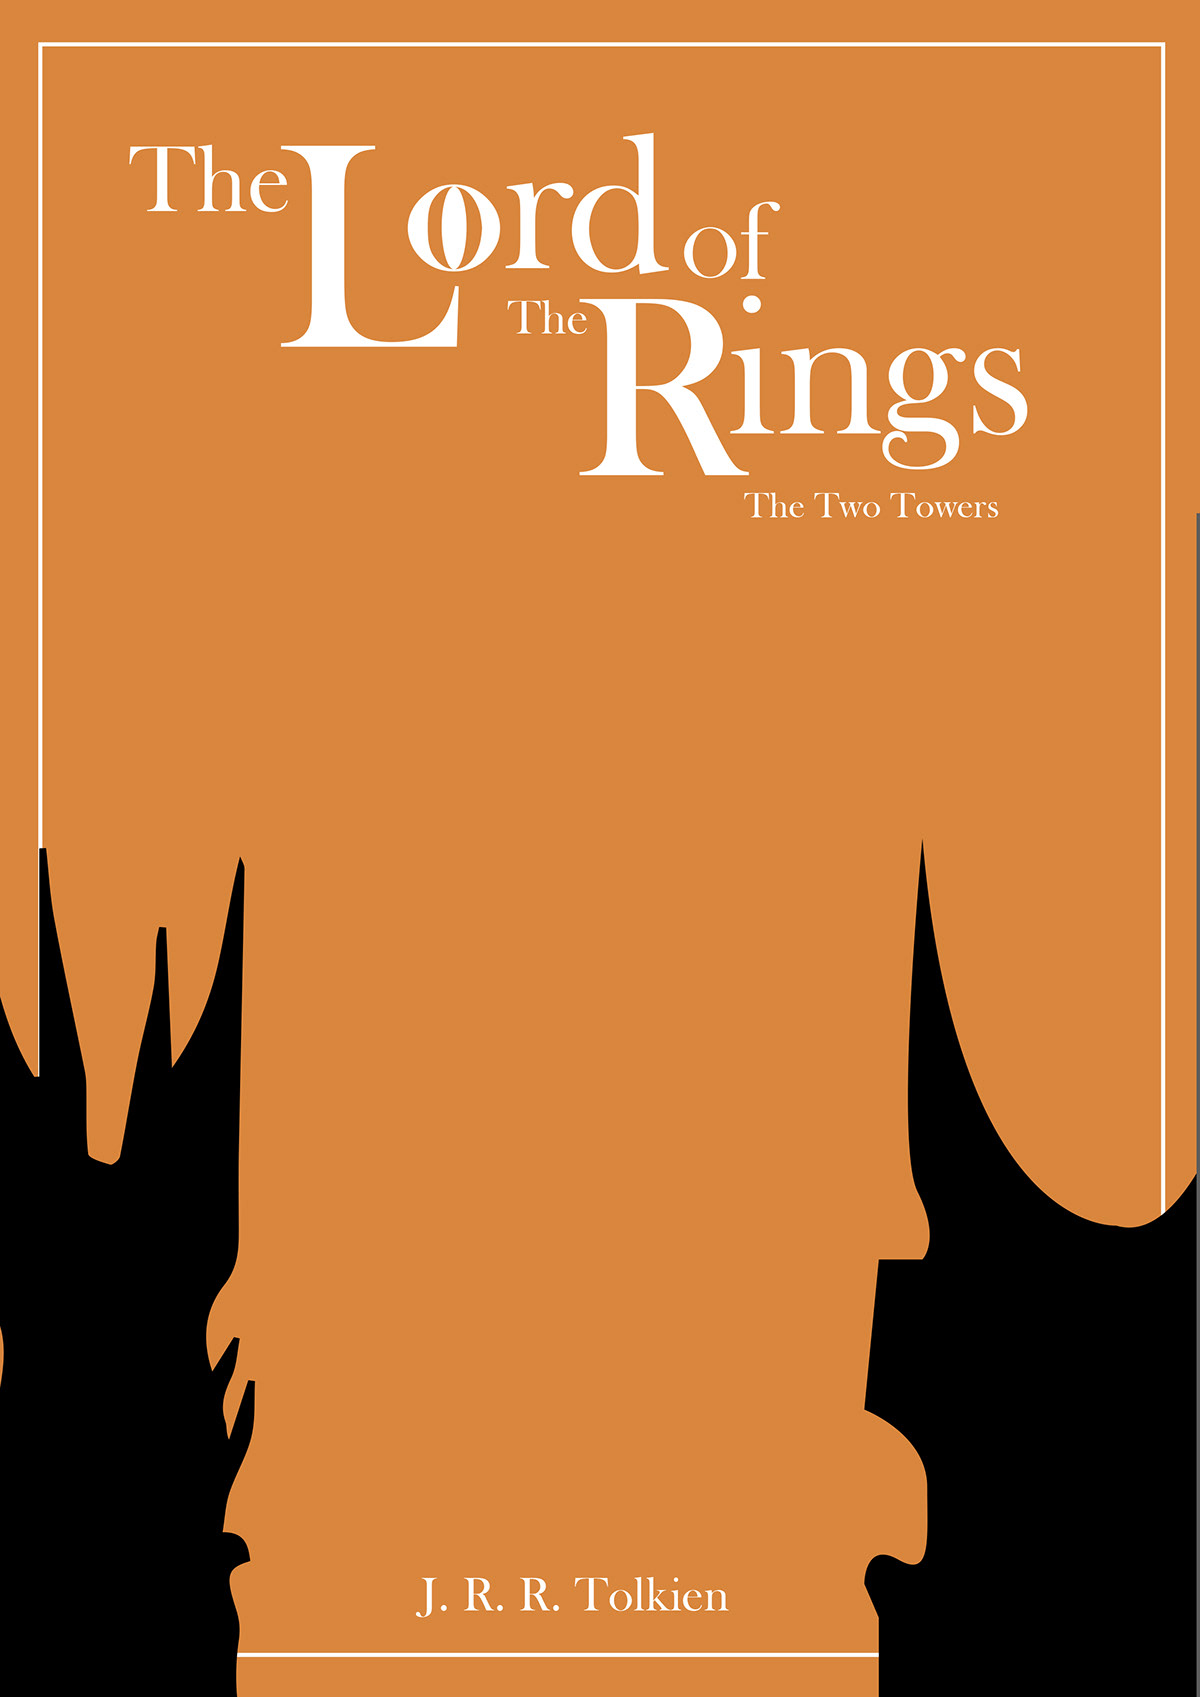 lord Good art poster novel book rings type font graphic